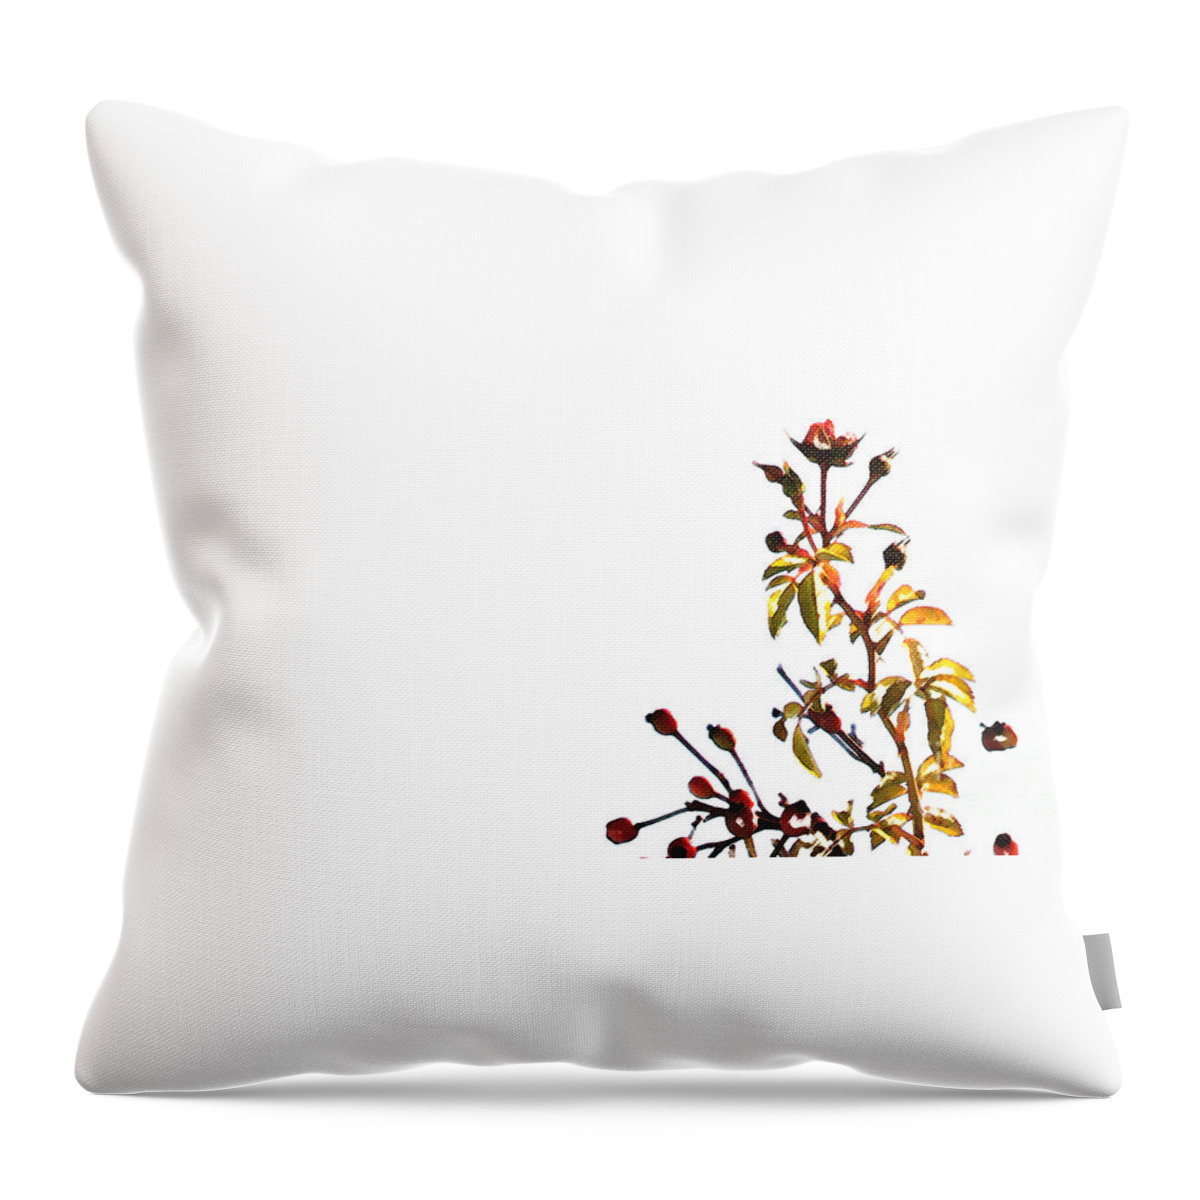 Rose Throw Pillow featuring the photograph Winter Rose by Linda Shafer